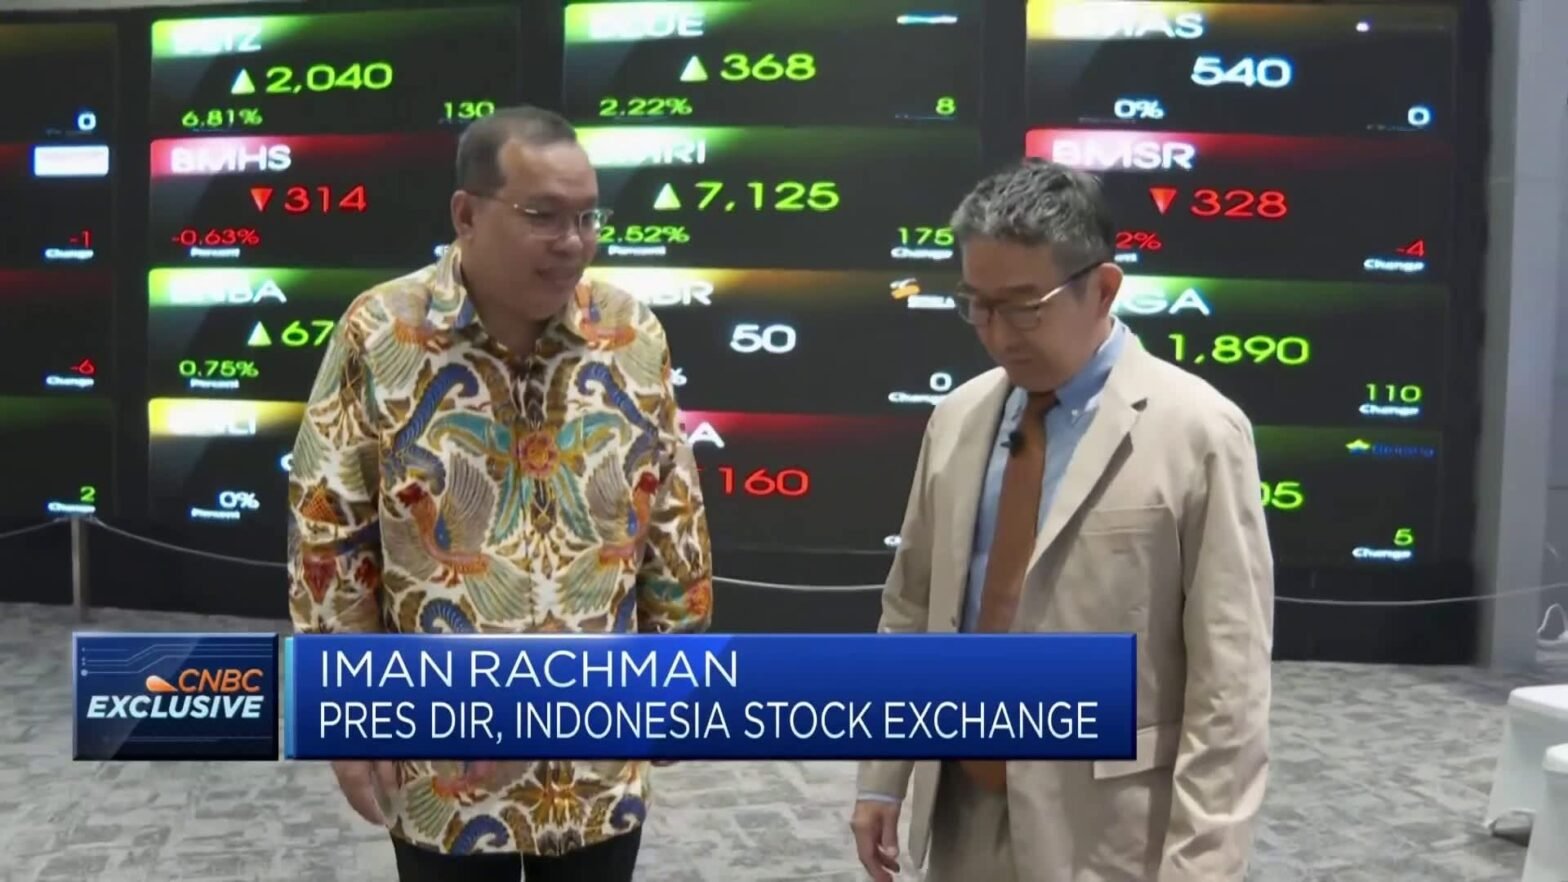 president-director-of-indonesia-stock-exchange-discusses-election-impact-on-market